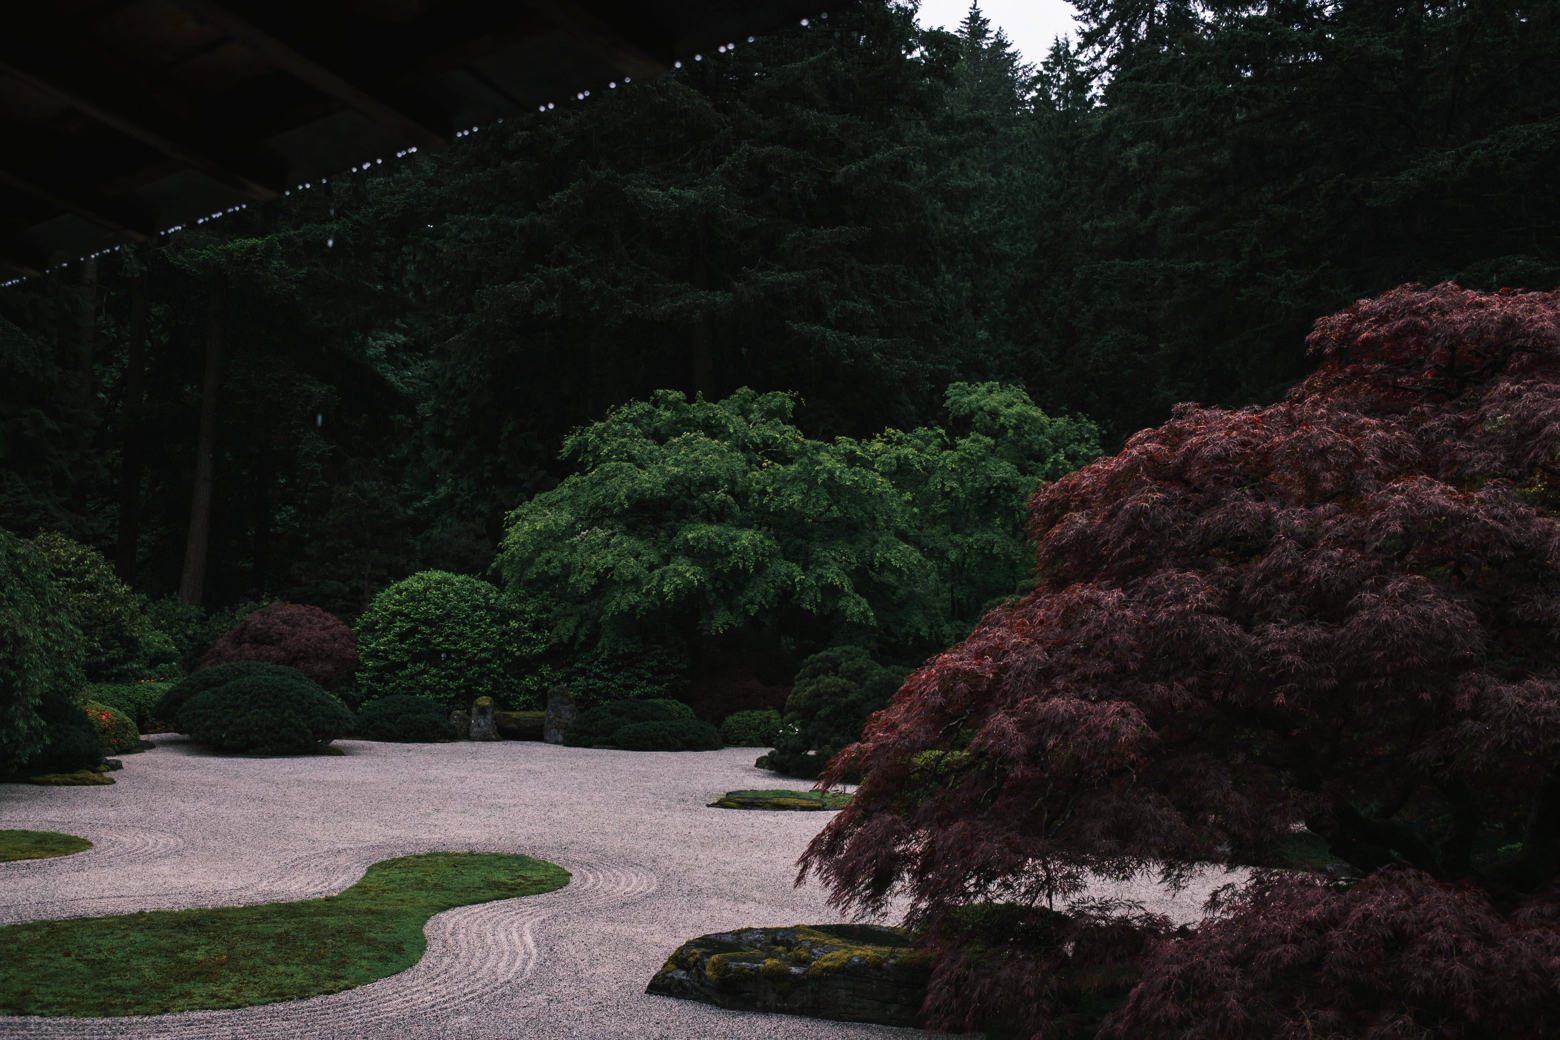 A Japanese Garden. It’s cold, it’s wet. I have had too much food.